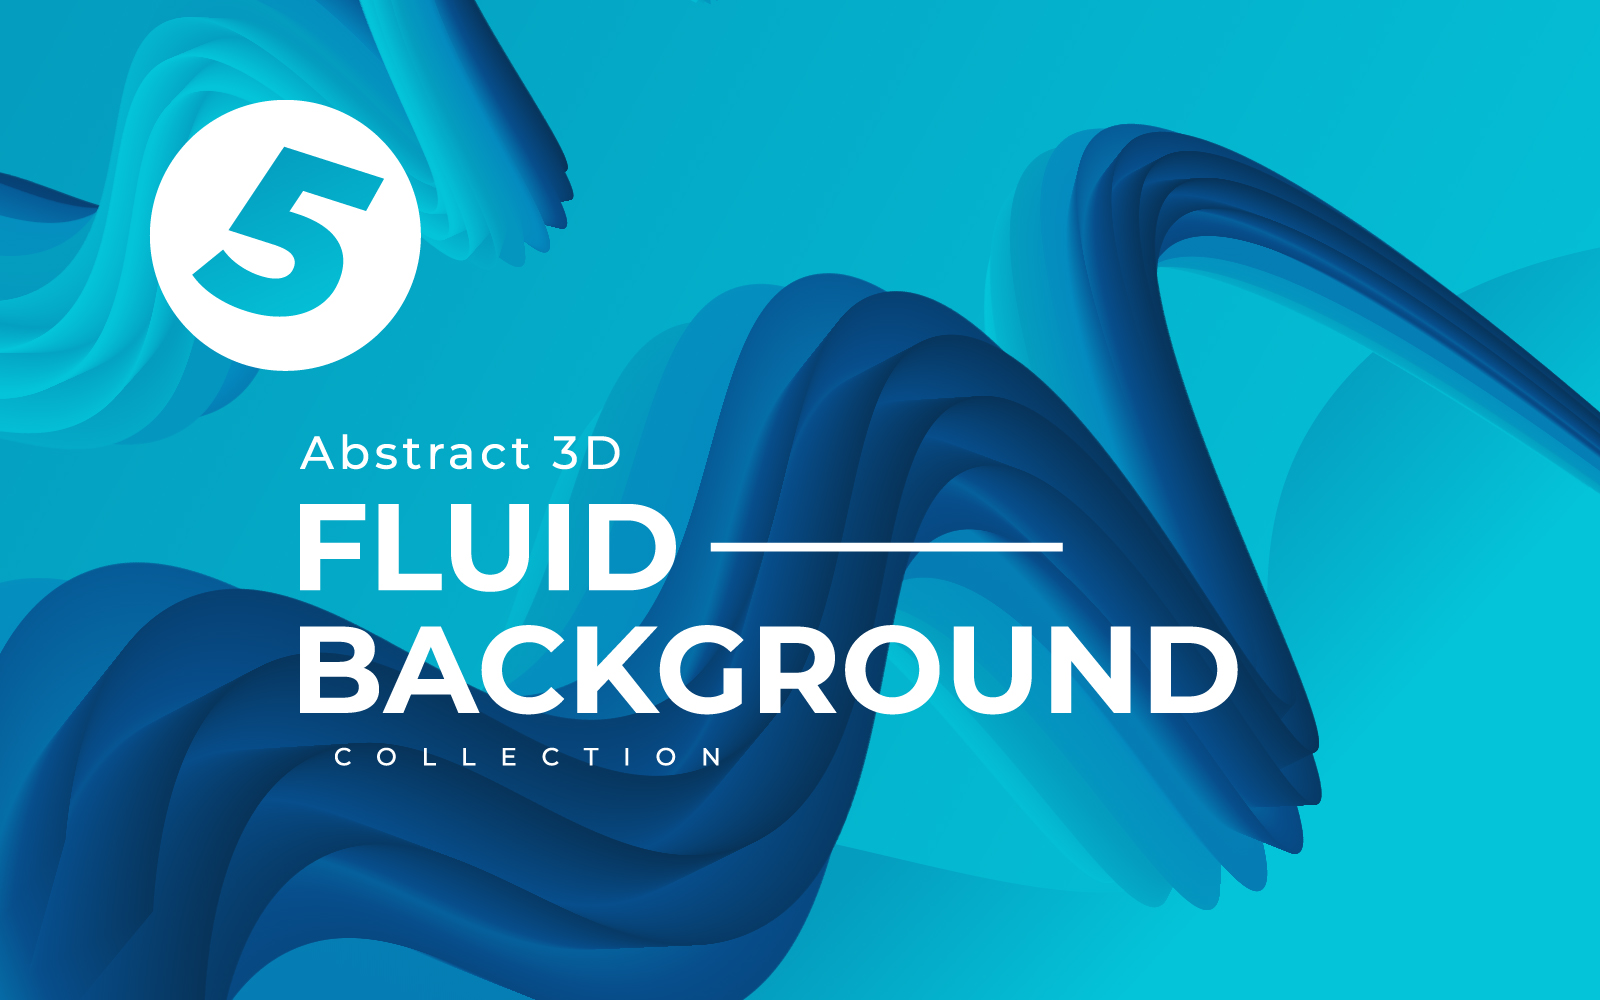 Abstract 3D Fluid Background Pack